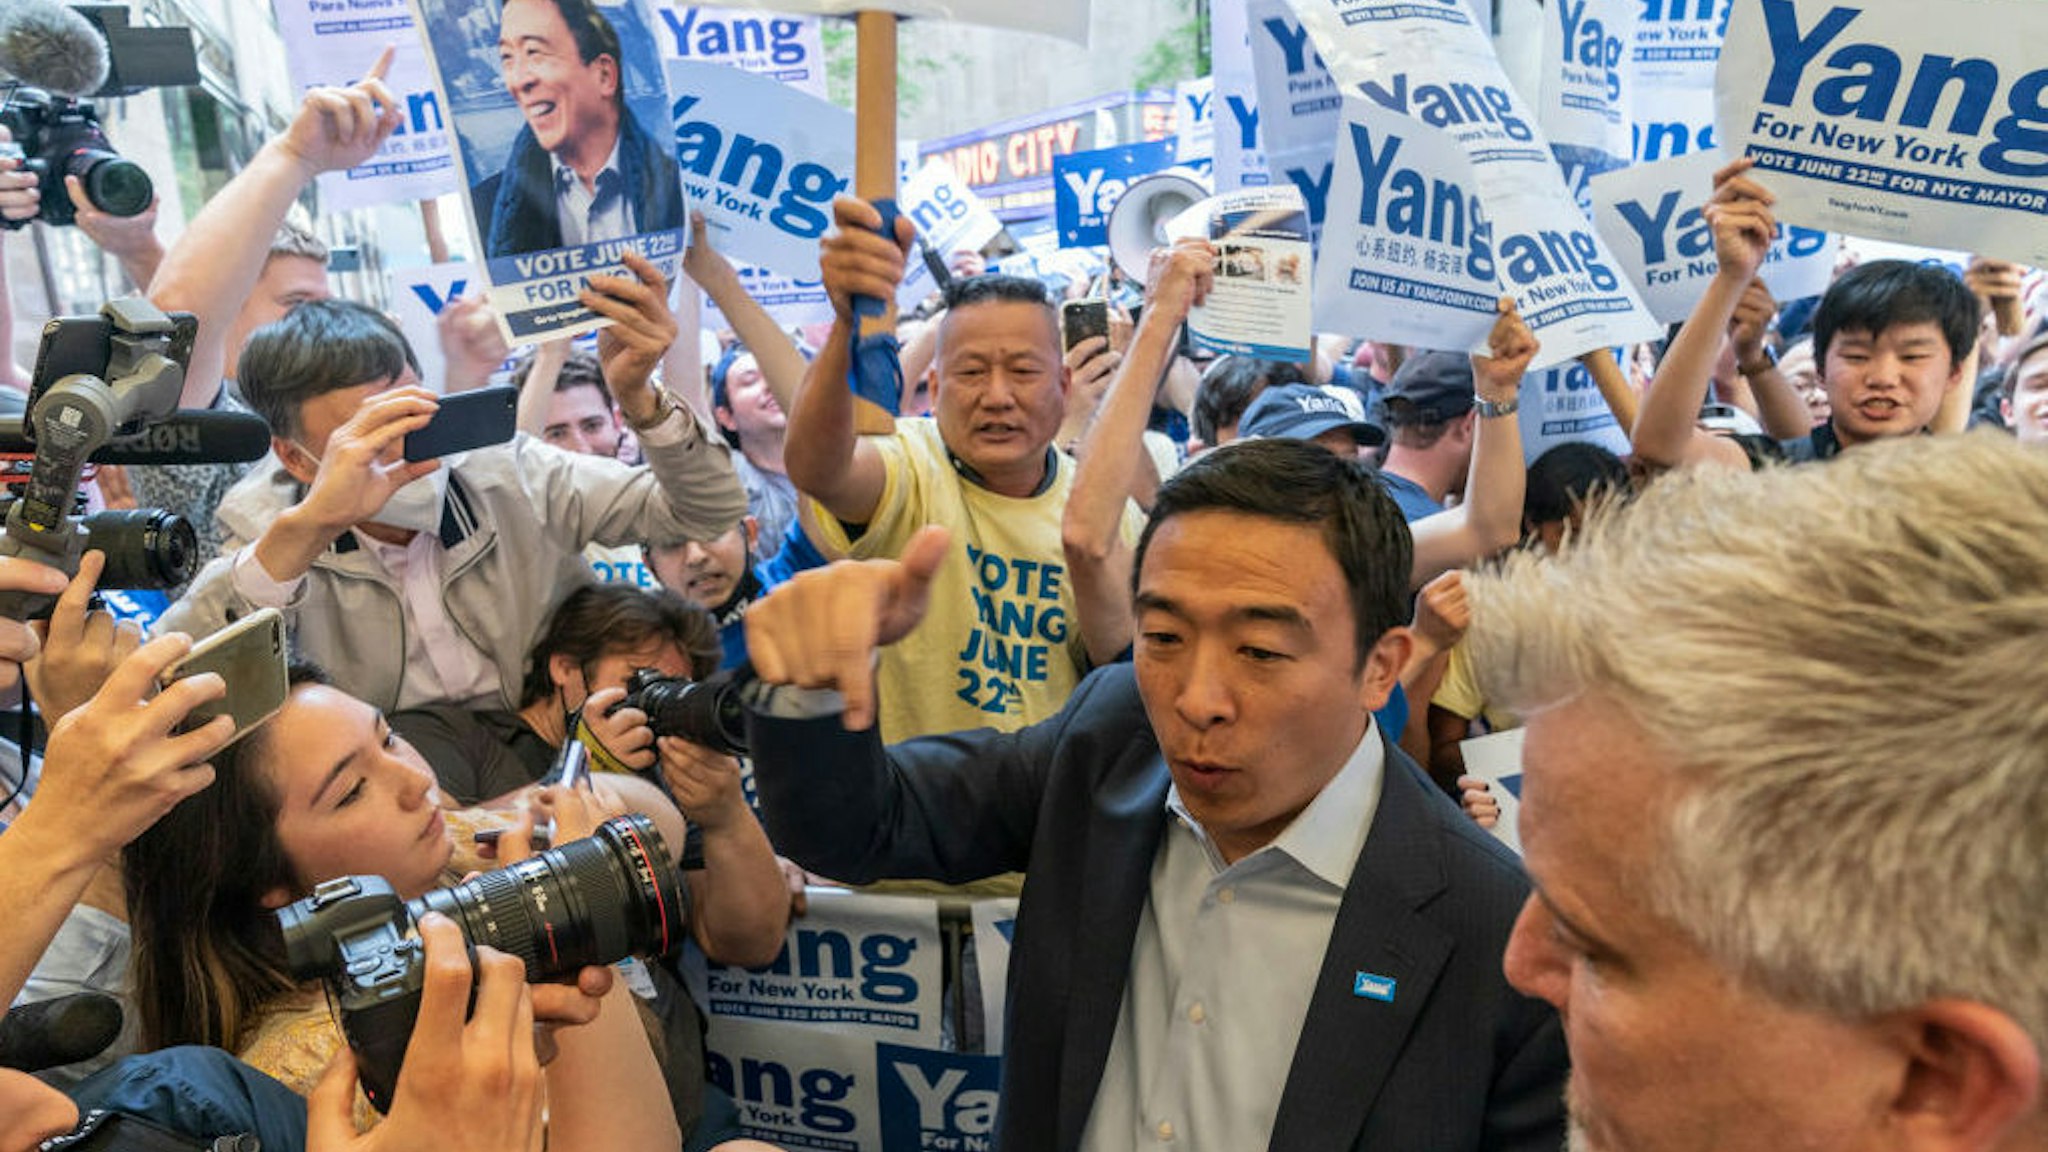 NEW YORK, UNITED STATES - 2021/06/16: Mayoral candidate Andrew Yang arrives for debate at NBC Studios at Rockefeller Center. He greets supporters gathering outside to appreciate their support. Eight candidates according to the city electoral commission qualified for debates: Eric Adams, Kathryn Garcia, Maya Wiley, Andrew Yang, Scott Stringer, Ray McGuire, Shaun Donovan and Dianne Morales. Supporters for each candidate staged a rally outside NBC center.